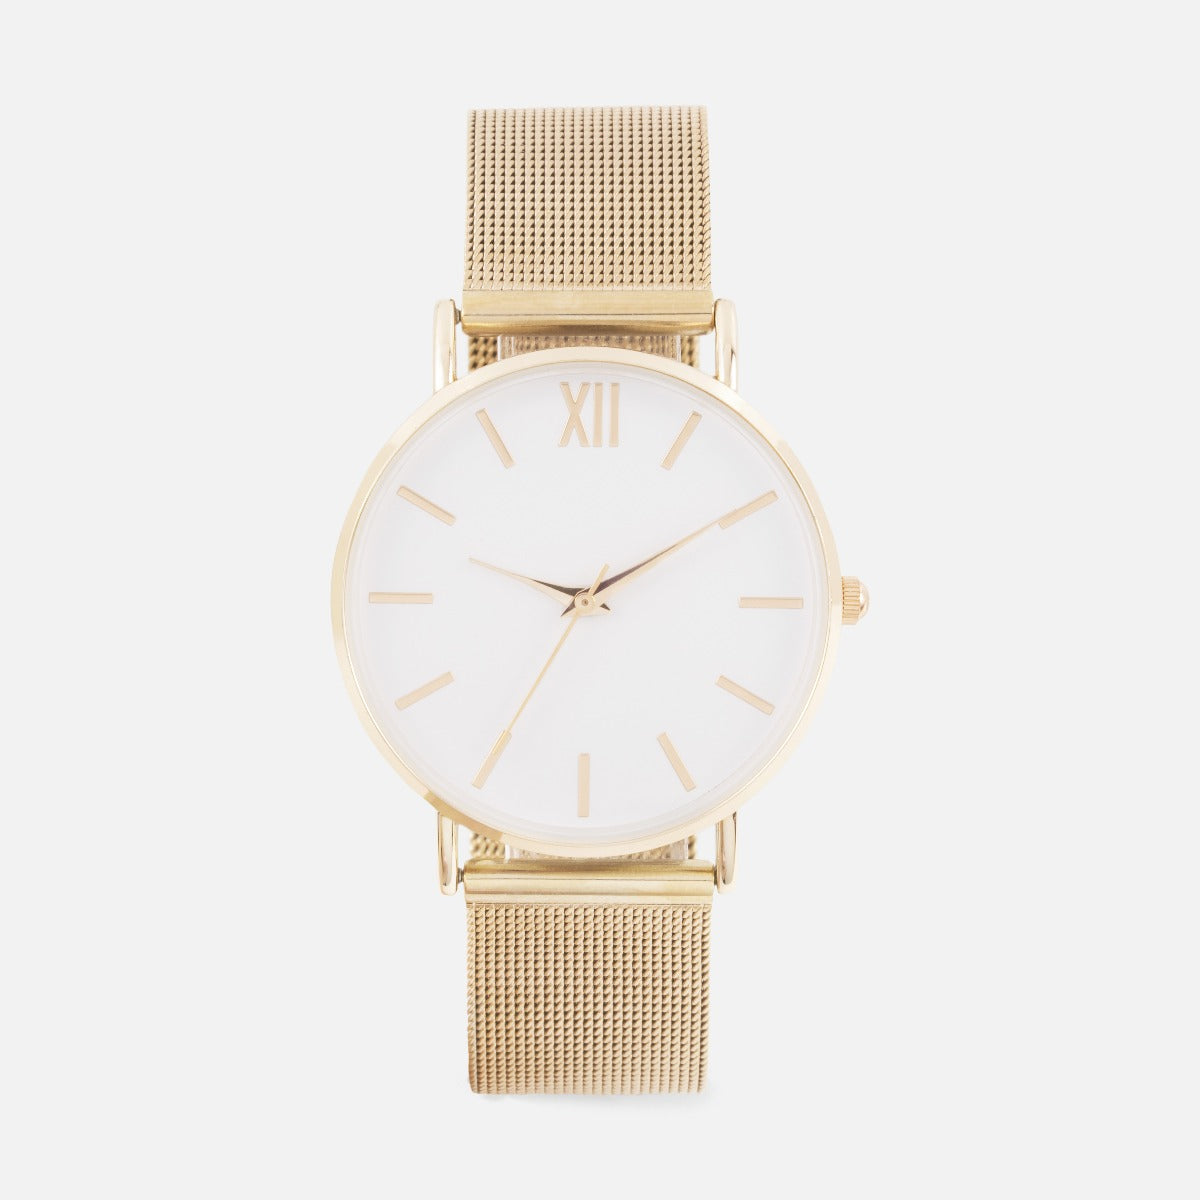 Iconik collection - golden watch with mesh bracelet 36 mm